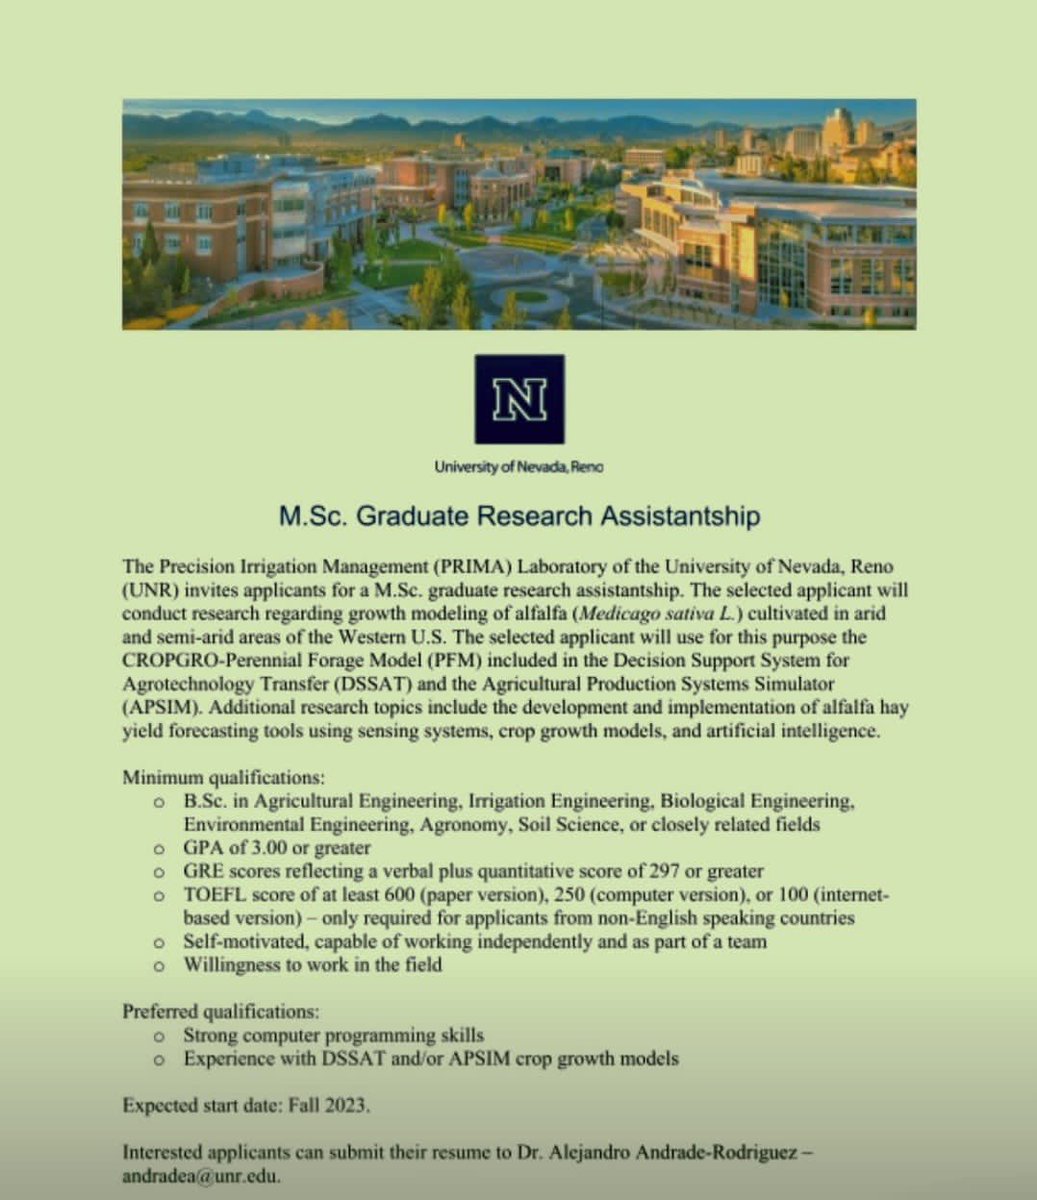 M.Sc. Graduate Research Assistant opportunity is available at University of Nevada, Rena. Share with your friends and family. #internationalstudents #Uk #universityofnevada #USA #MSc